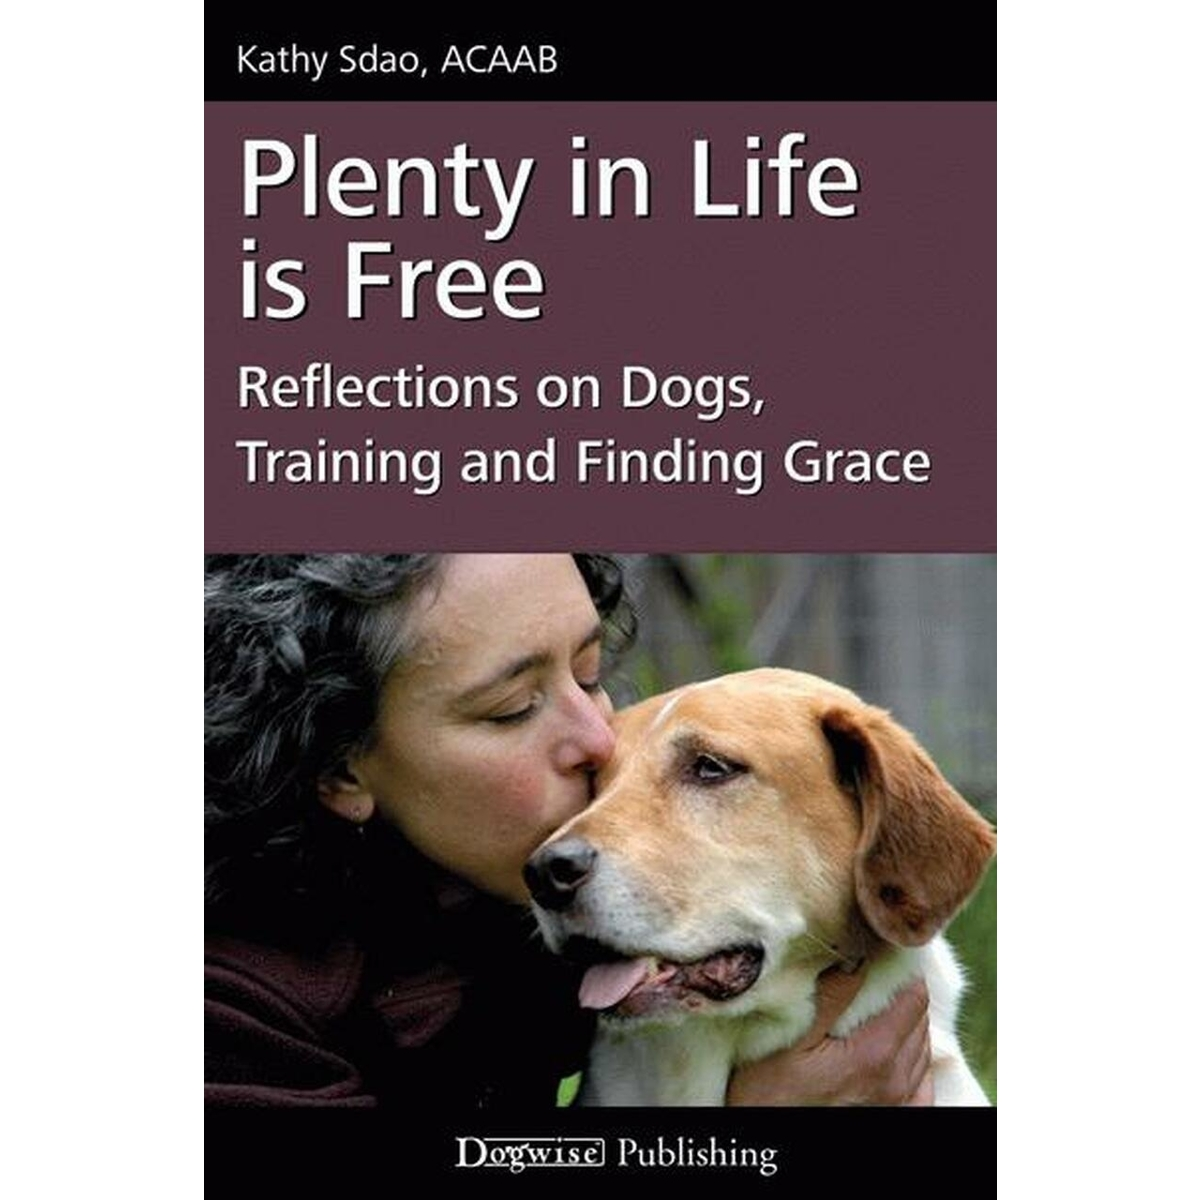 "Plenty in Life Is Free: Reflections On Dogs, Training and Finding Grace" by Kathy Sdao (eBook)